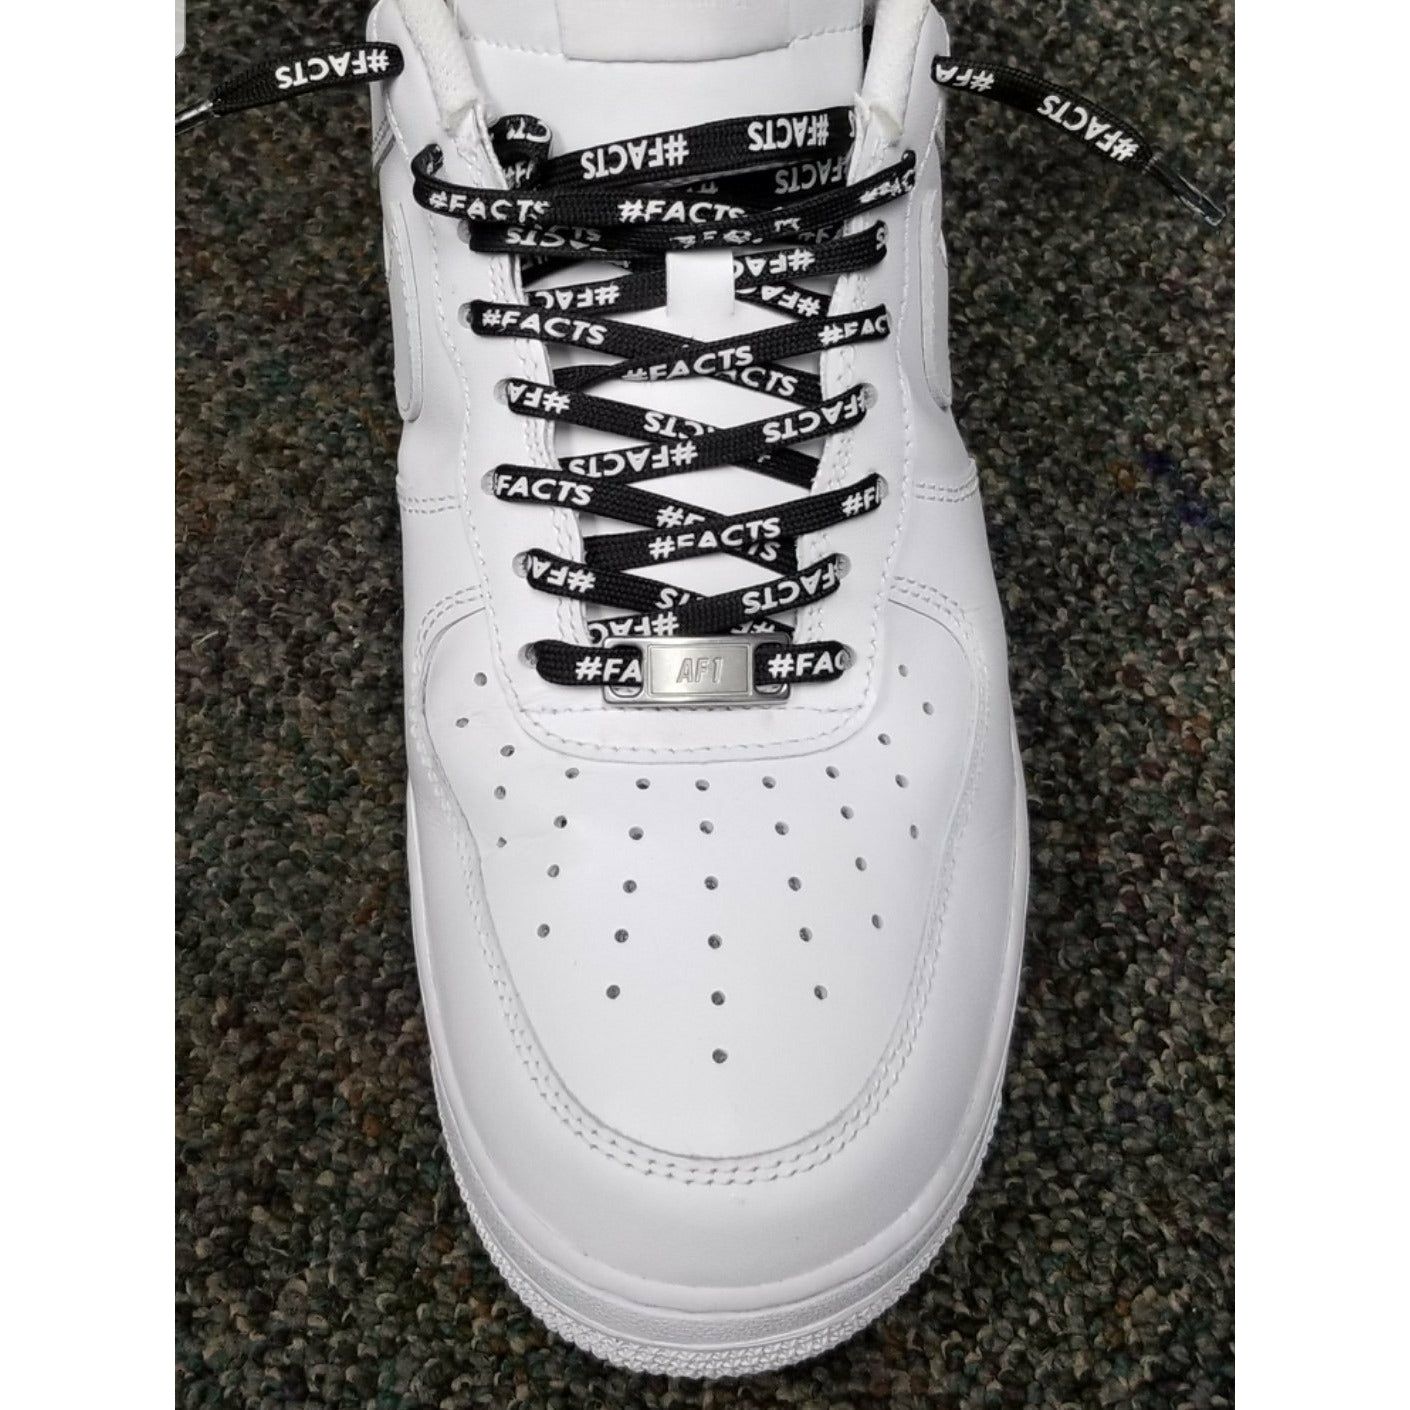 #FACTS Laces - Get Laced Laces